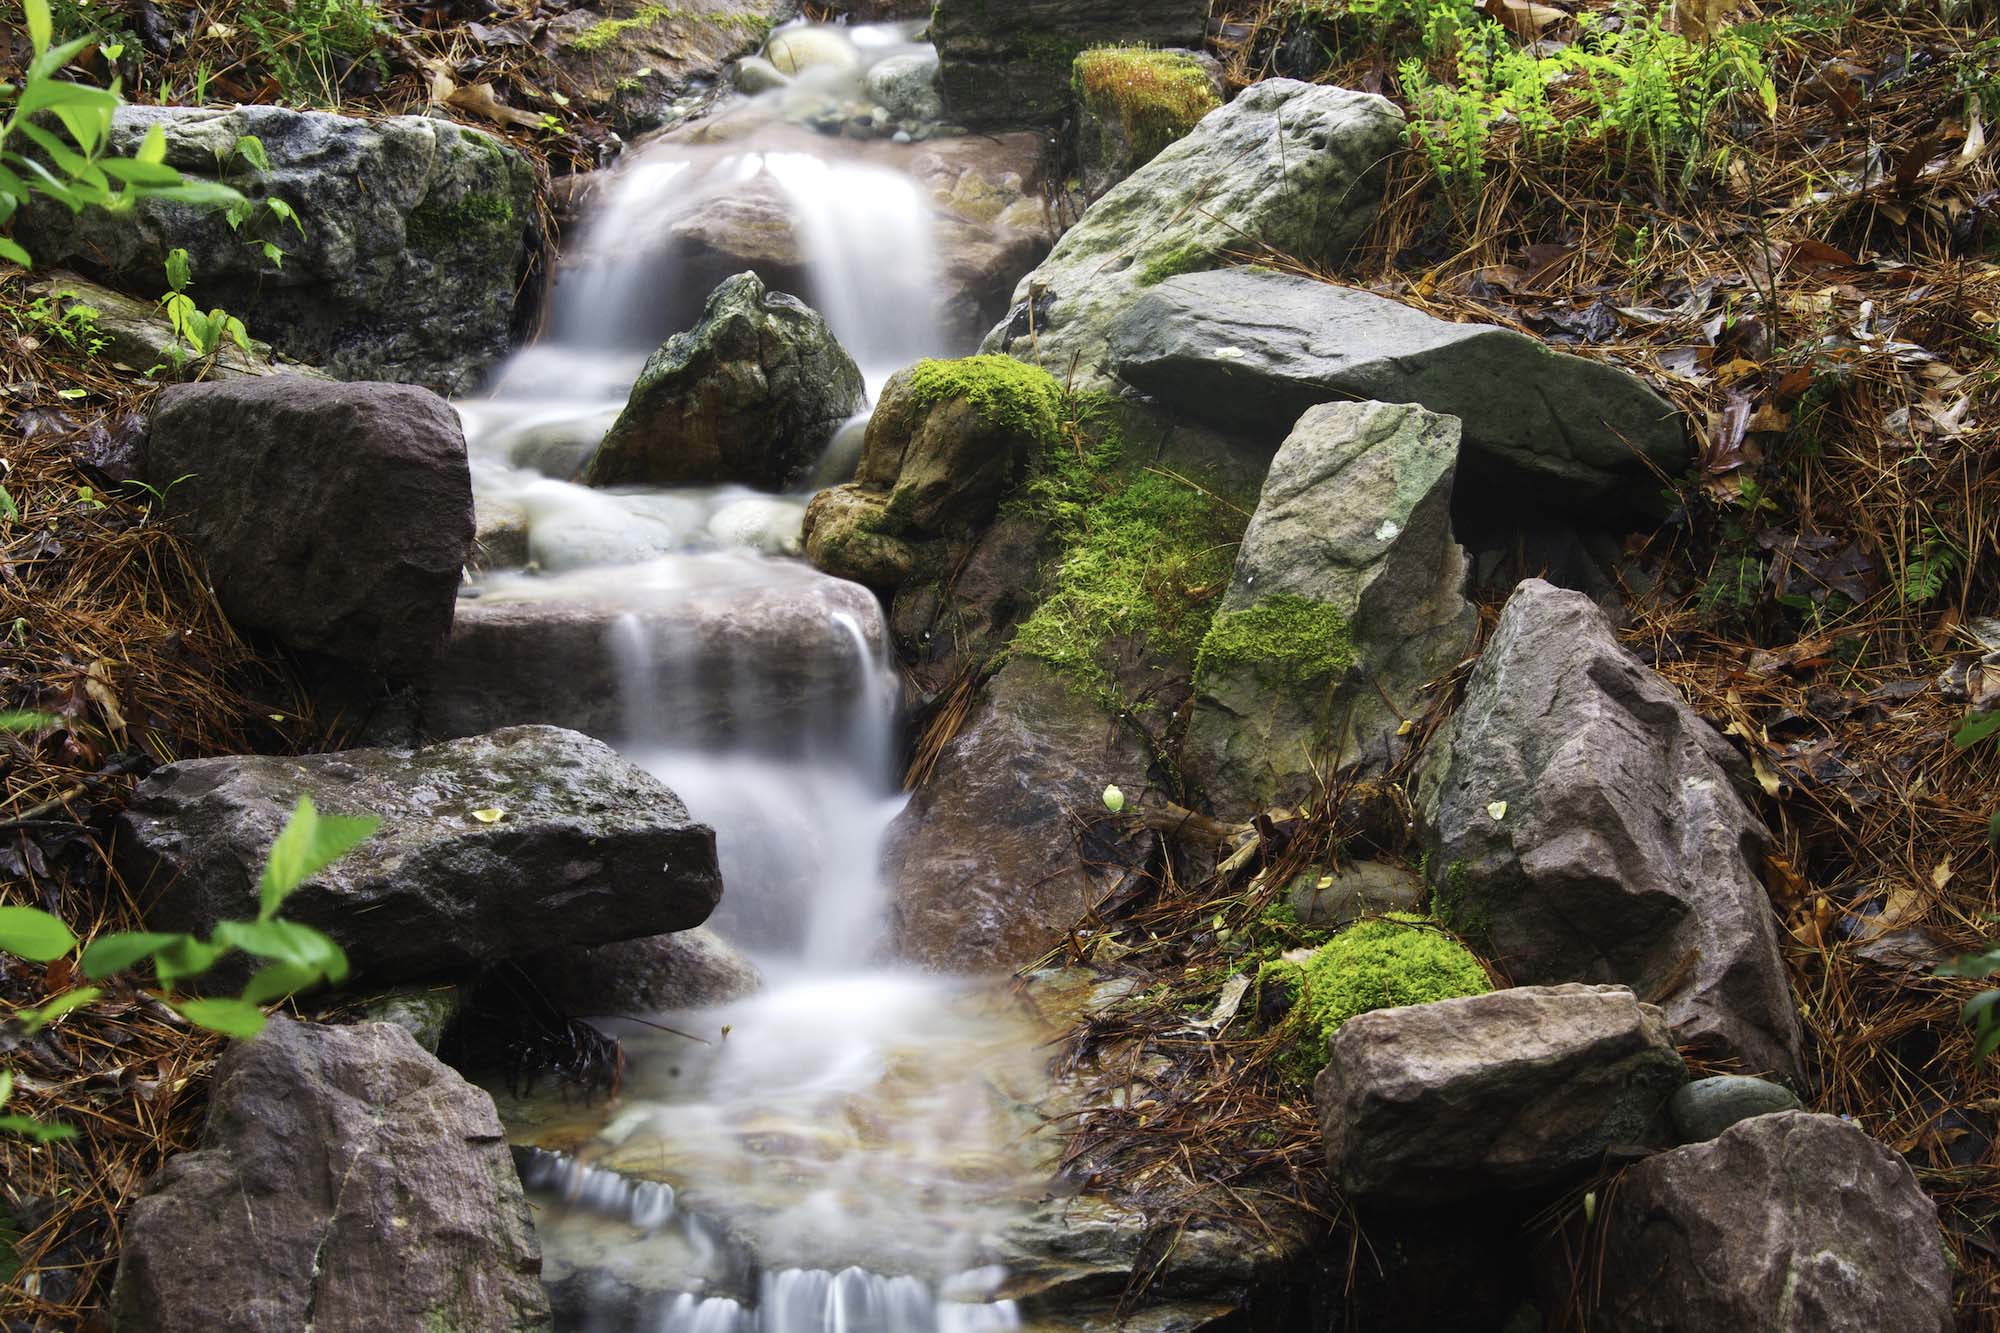 A waterfall in Pine Clouds Mountain Stream. Photo by Rick Fisher.